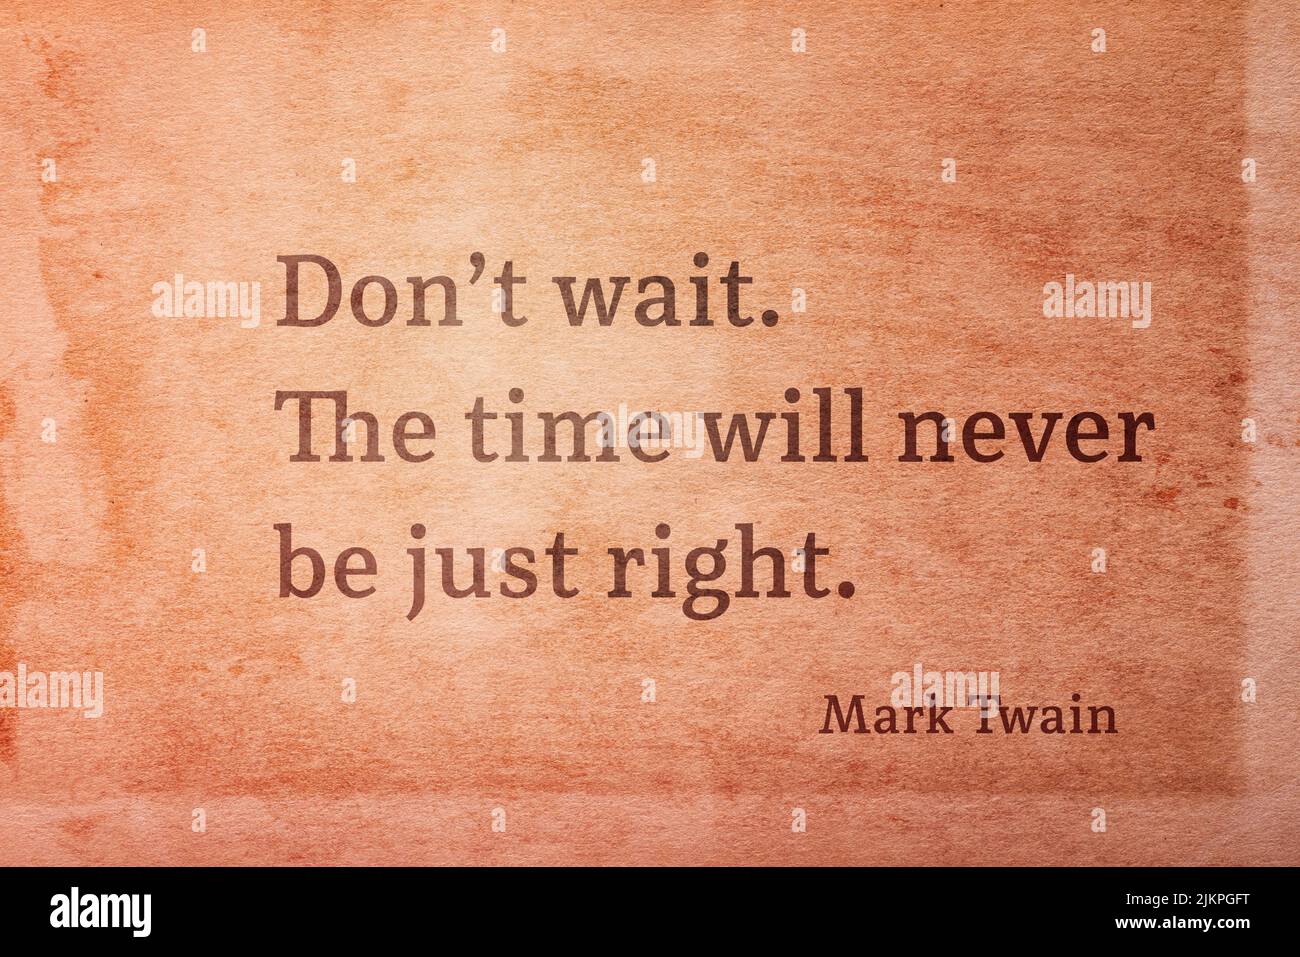 Don’t wait. The time will never be just right  - famous American writer Mark Twain quote printed on vintage grunge paper Stock Photo